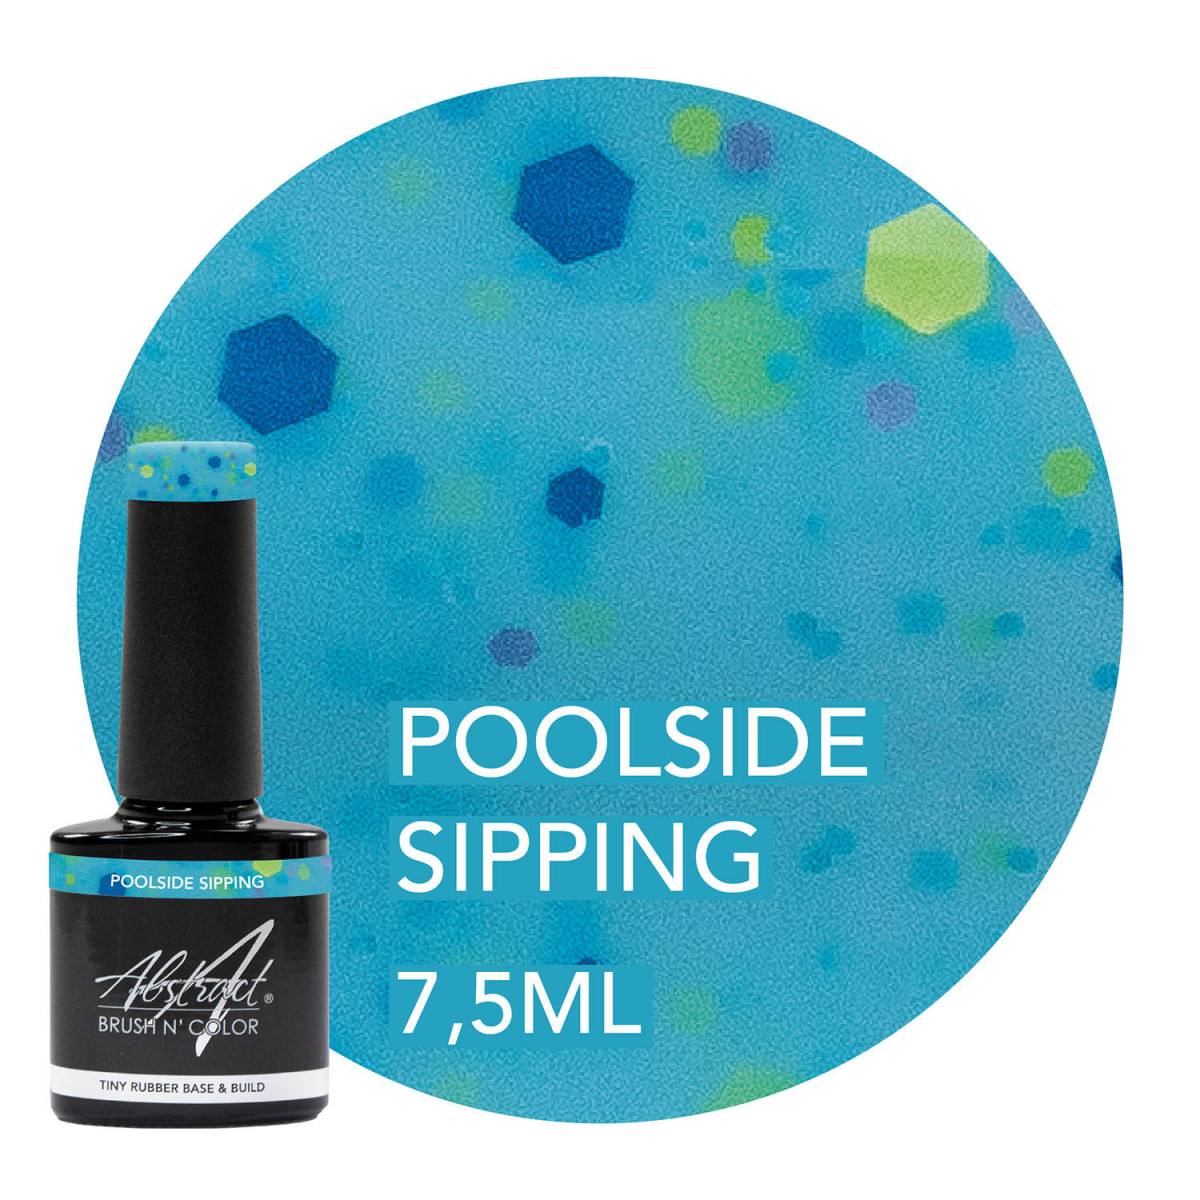 PRE-ORDER Poolside Glimming - TINY Rubber Base & Build Gel Abstract